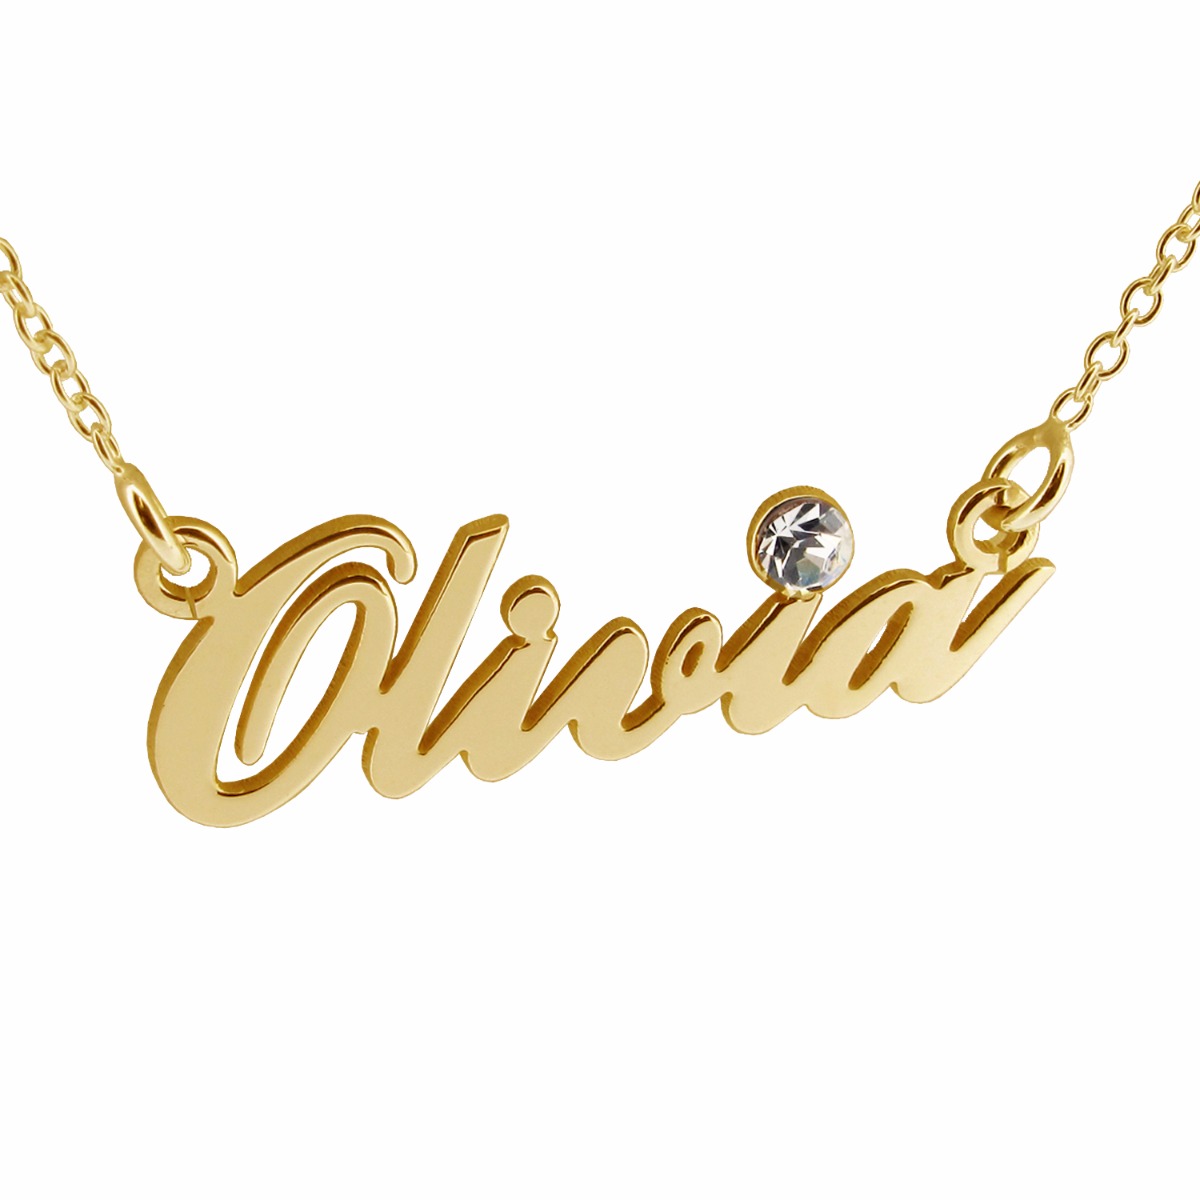 14k Gold Carrie Style Name Necklace With CZ Crystal (Sex & The City)